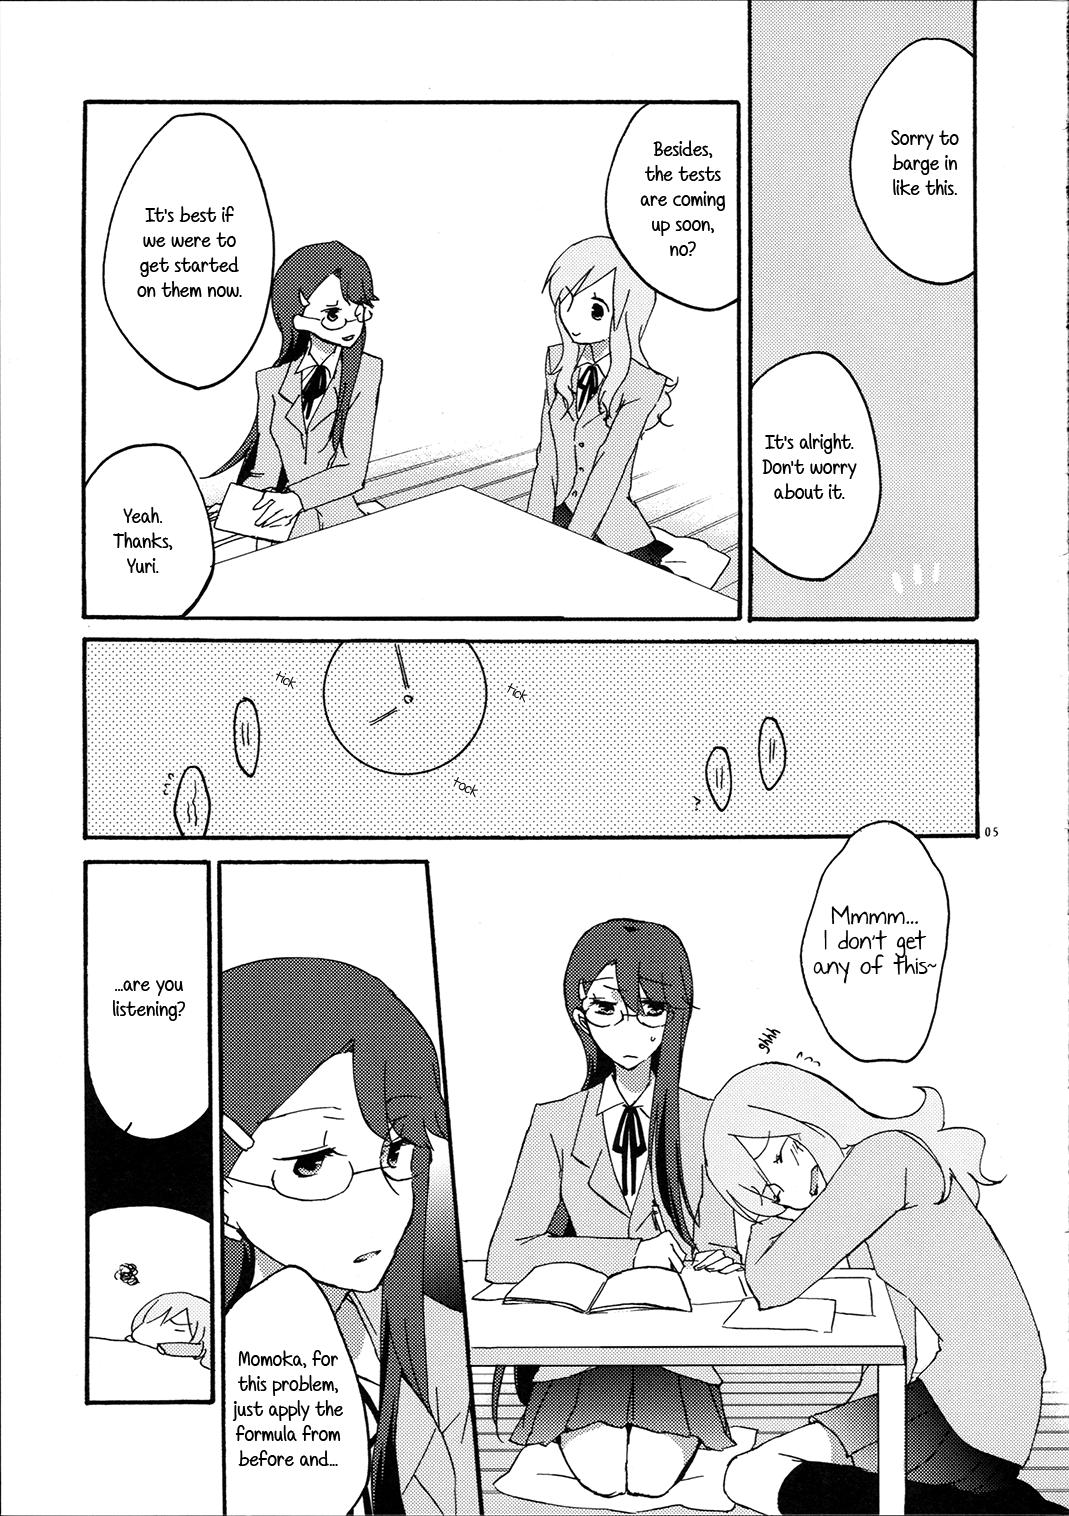 Lez Fuck Yuri to Issho ni Obenkyou. | Studying Together with Yuri. - Heartcatch precure Fuck My Pussy - Page 5